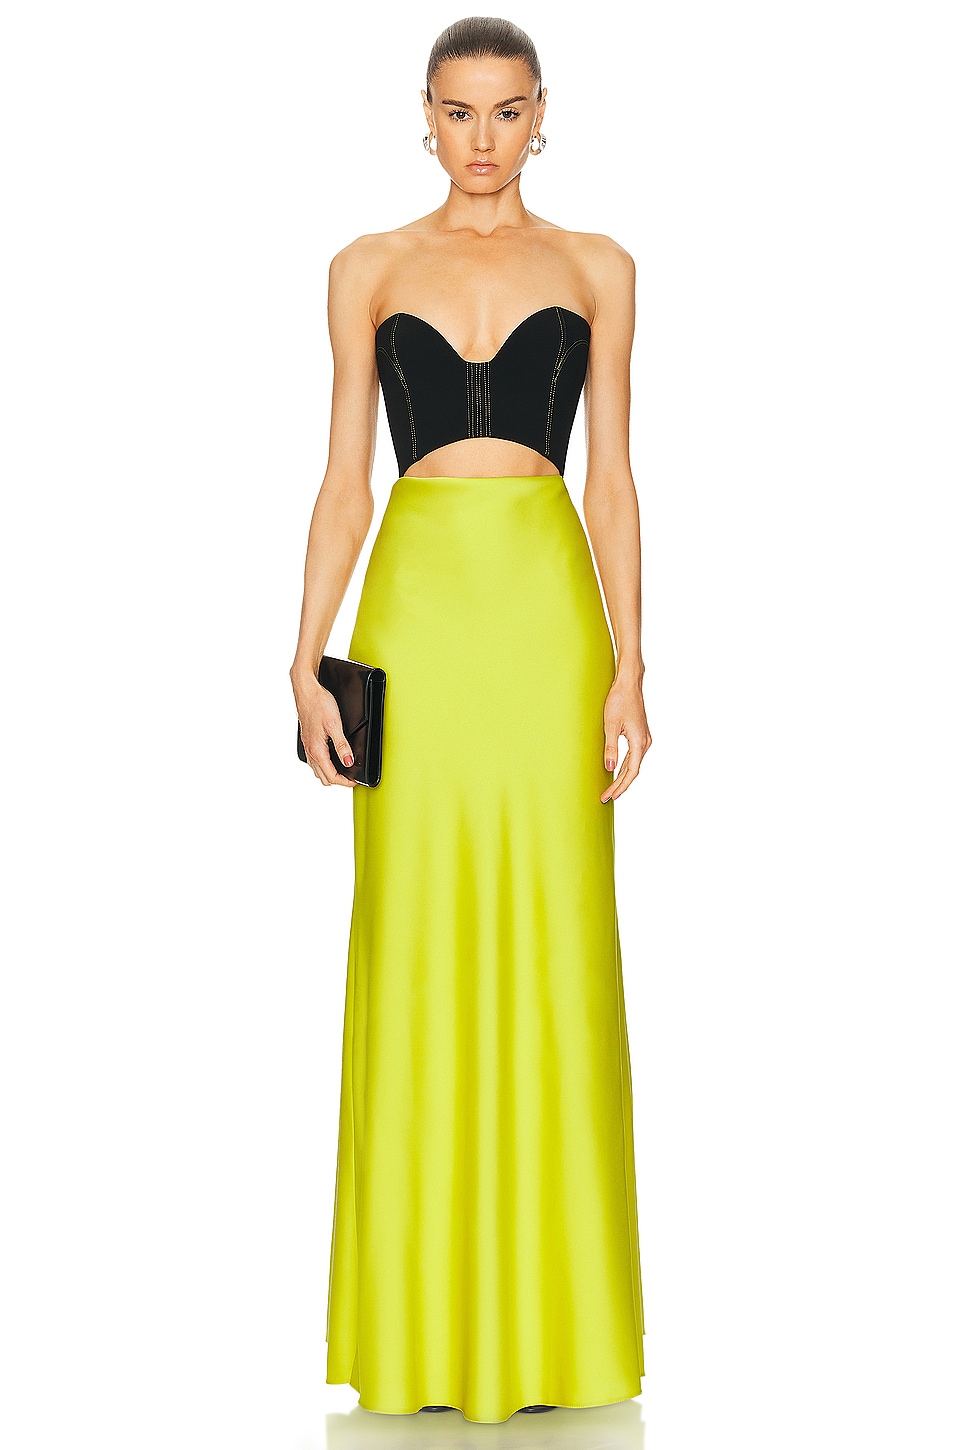 Image 1 of ILA Pina Corsetry Inspired Strapless Maxi Dress in Black & Mustard